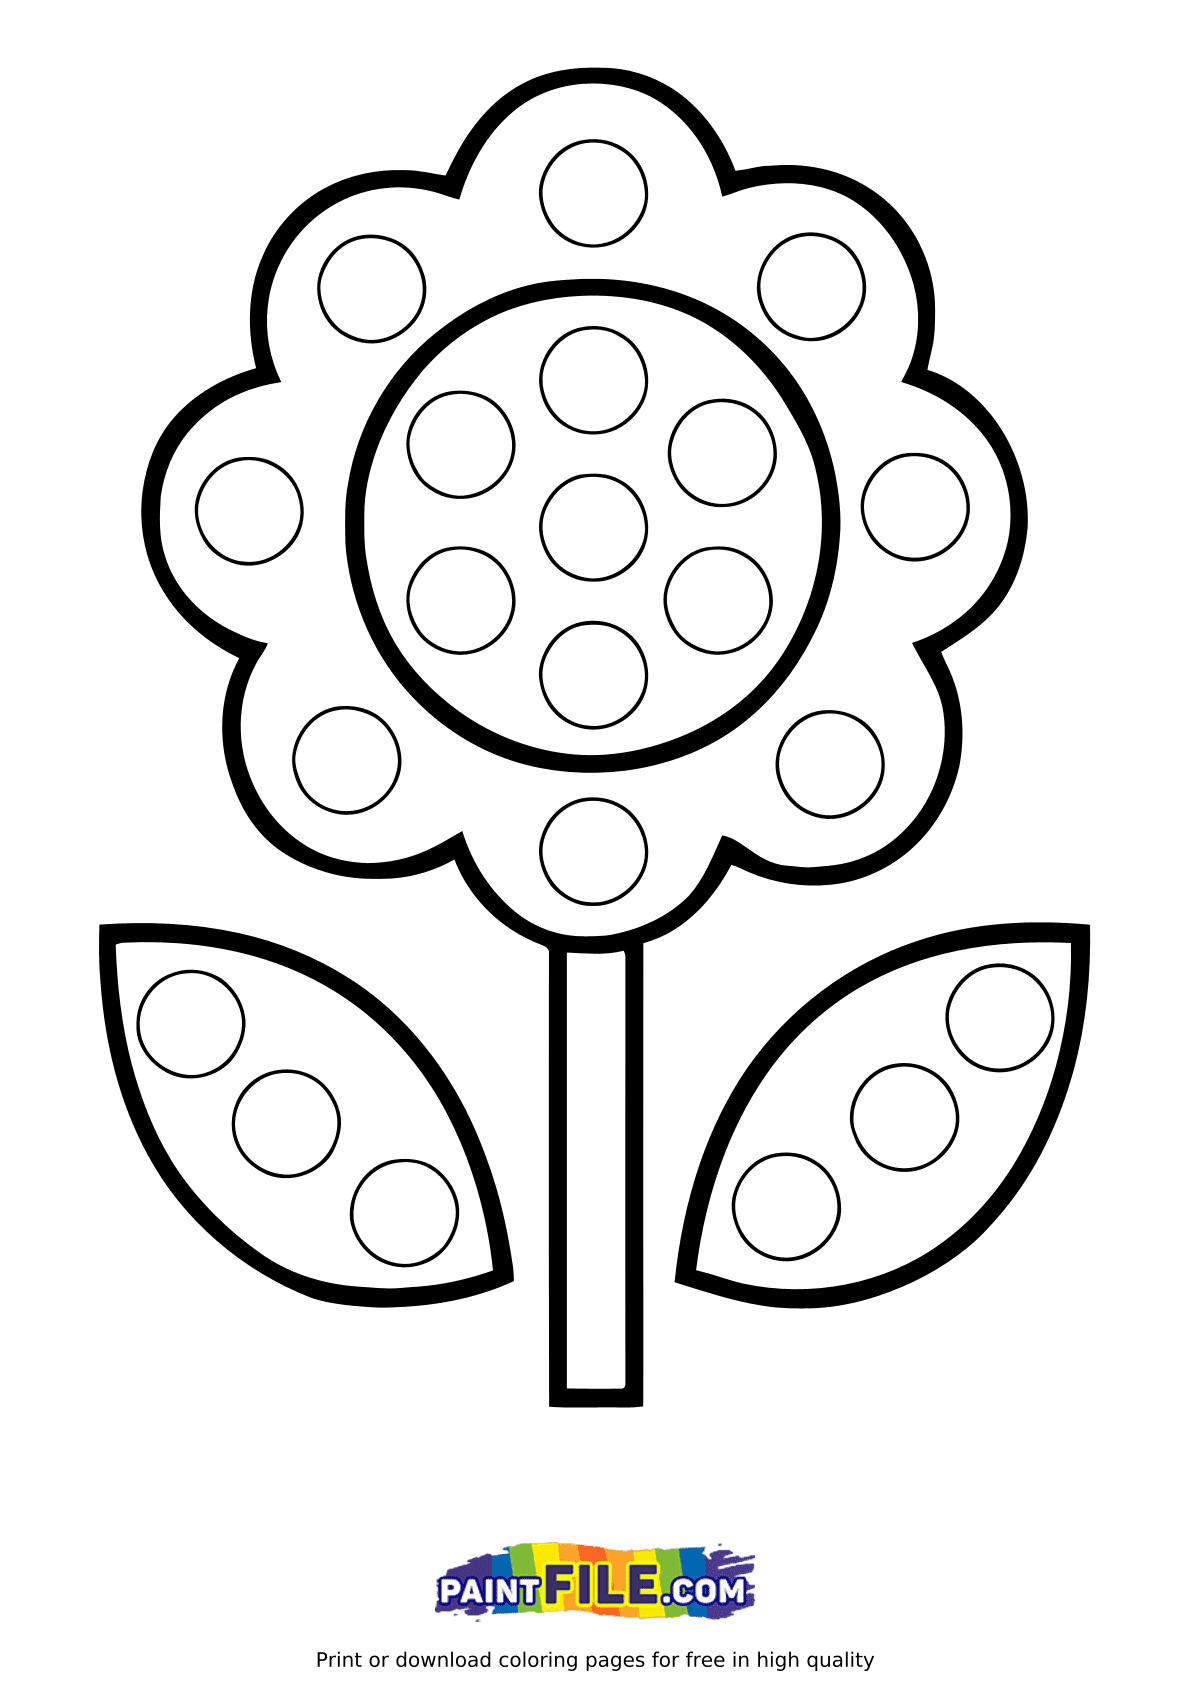 Yellow Flower Pop it Coloring Page